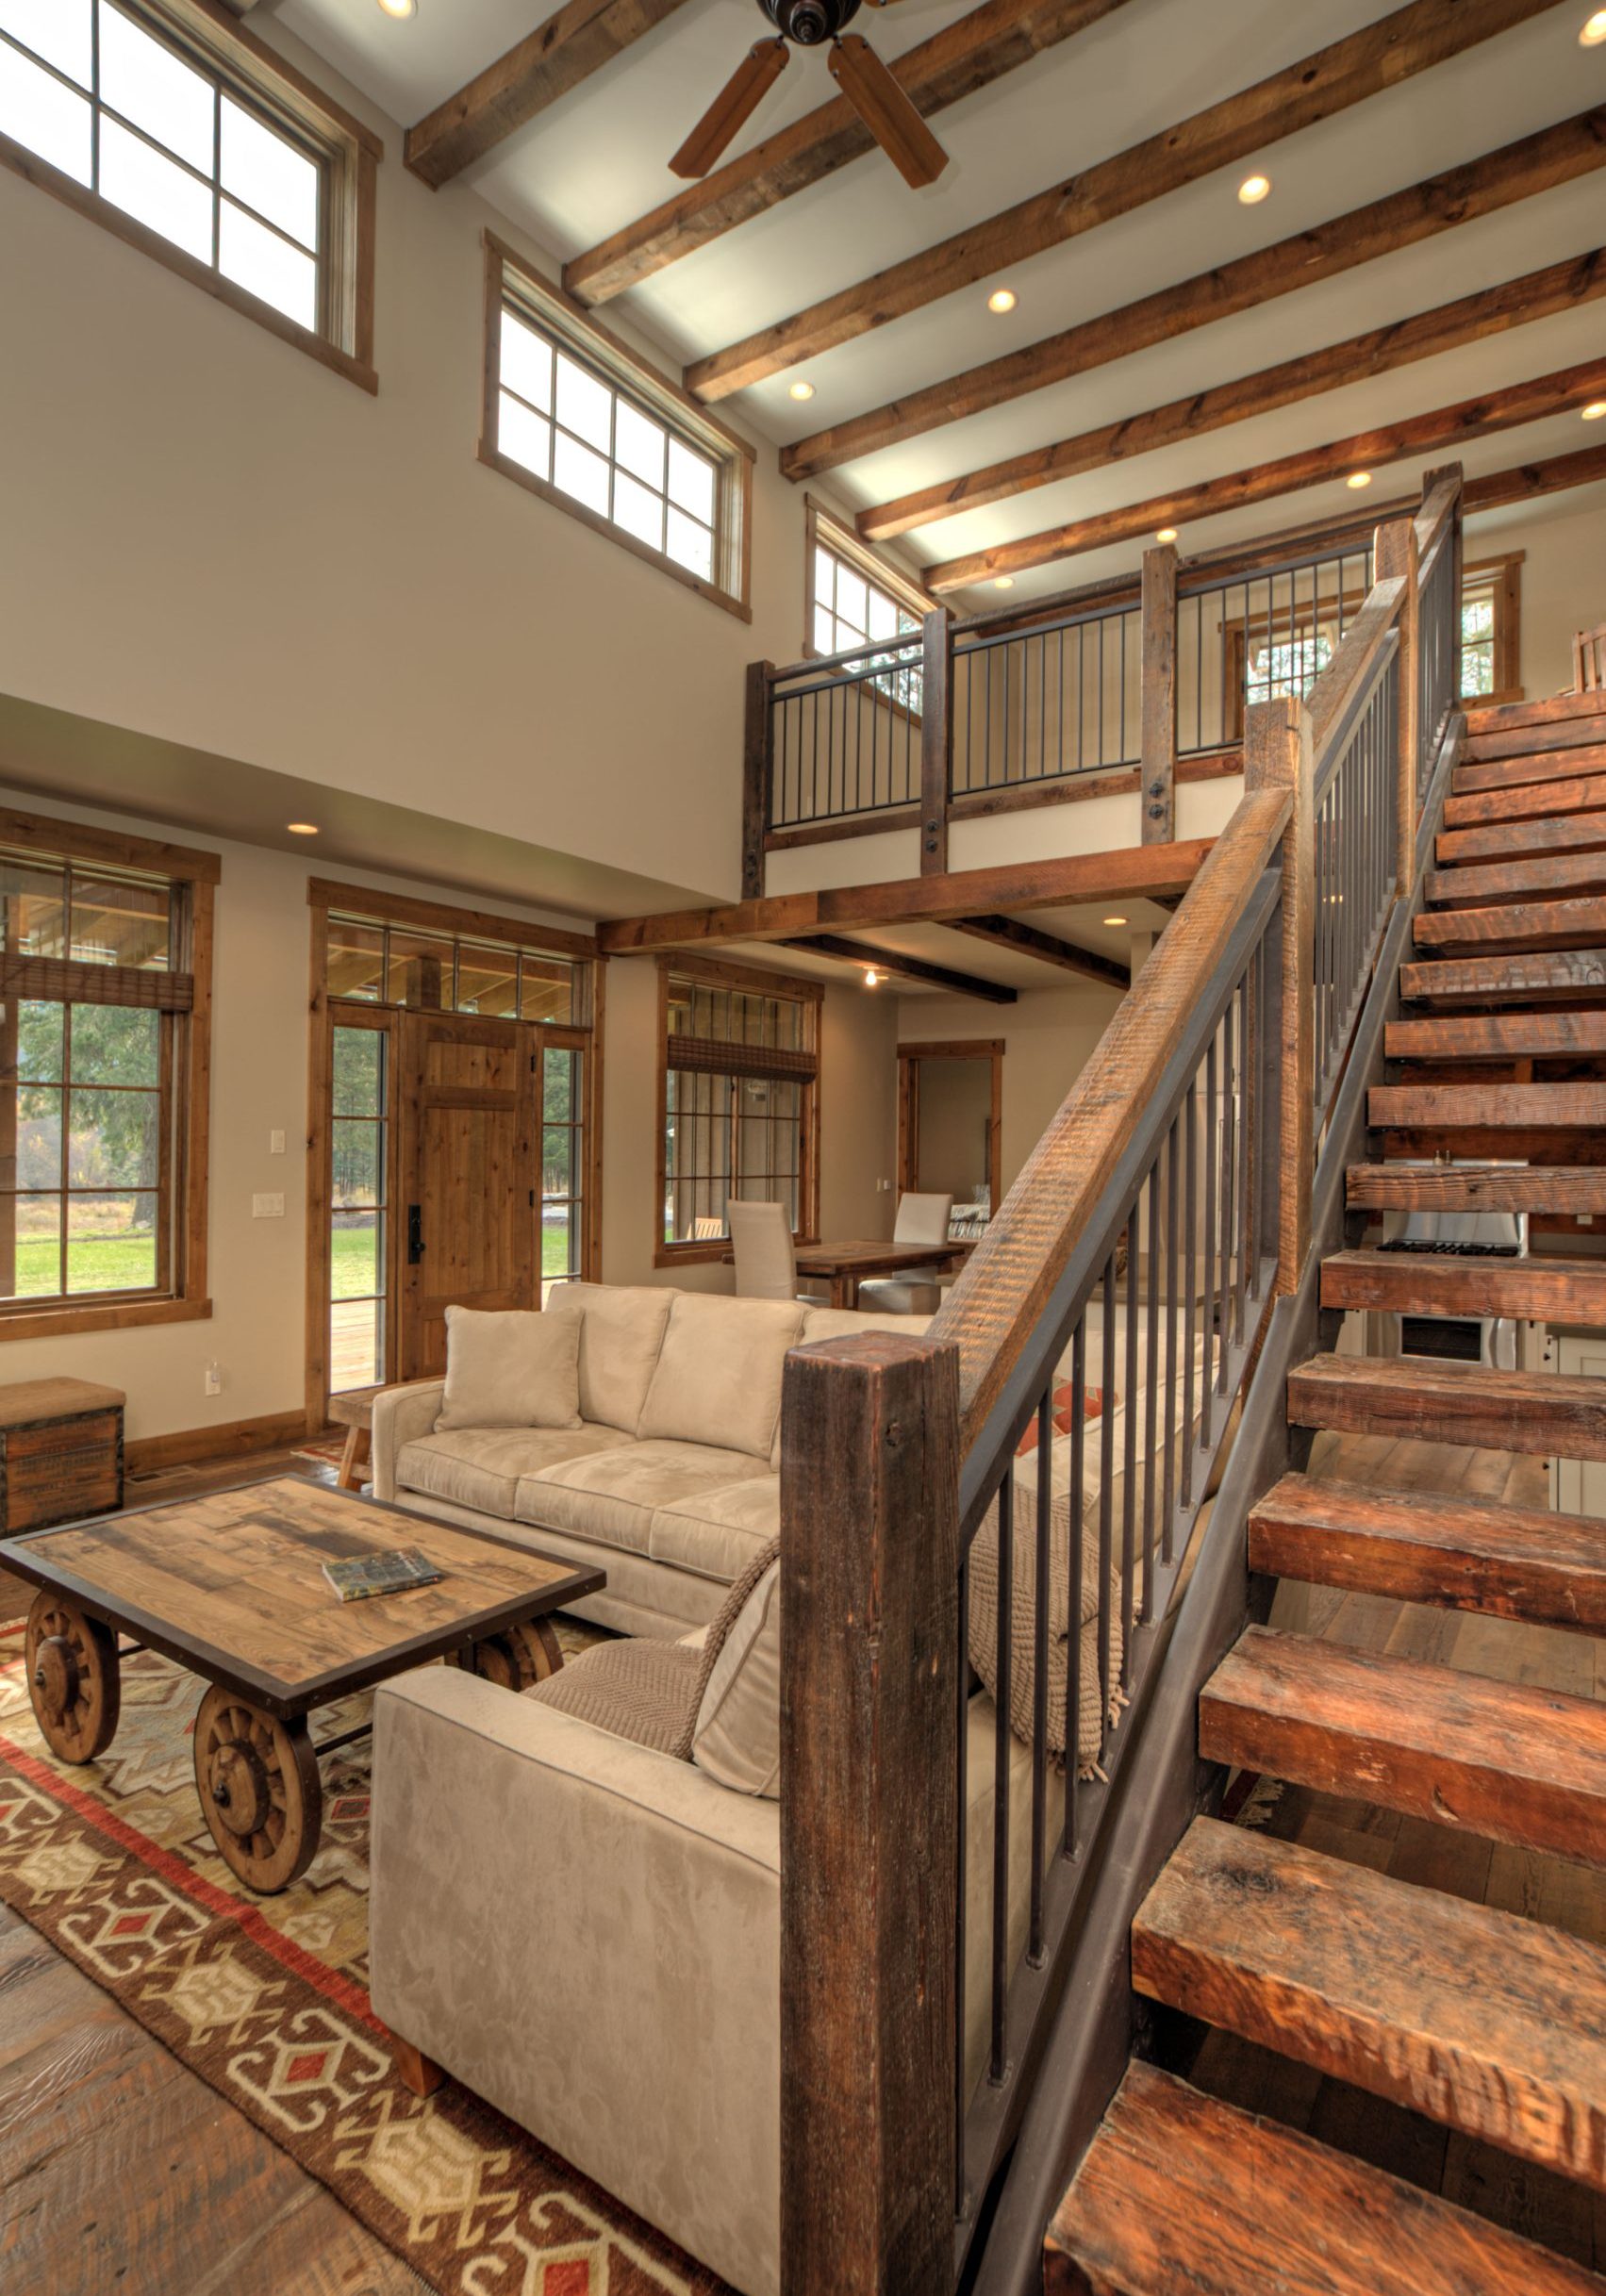 Interior photo of Lucky 4 Ranch. Couch, coffee table, staircase on the right side leading up to the second floor.